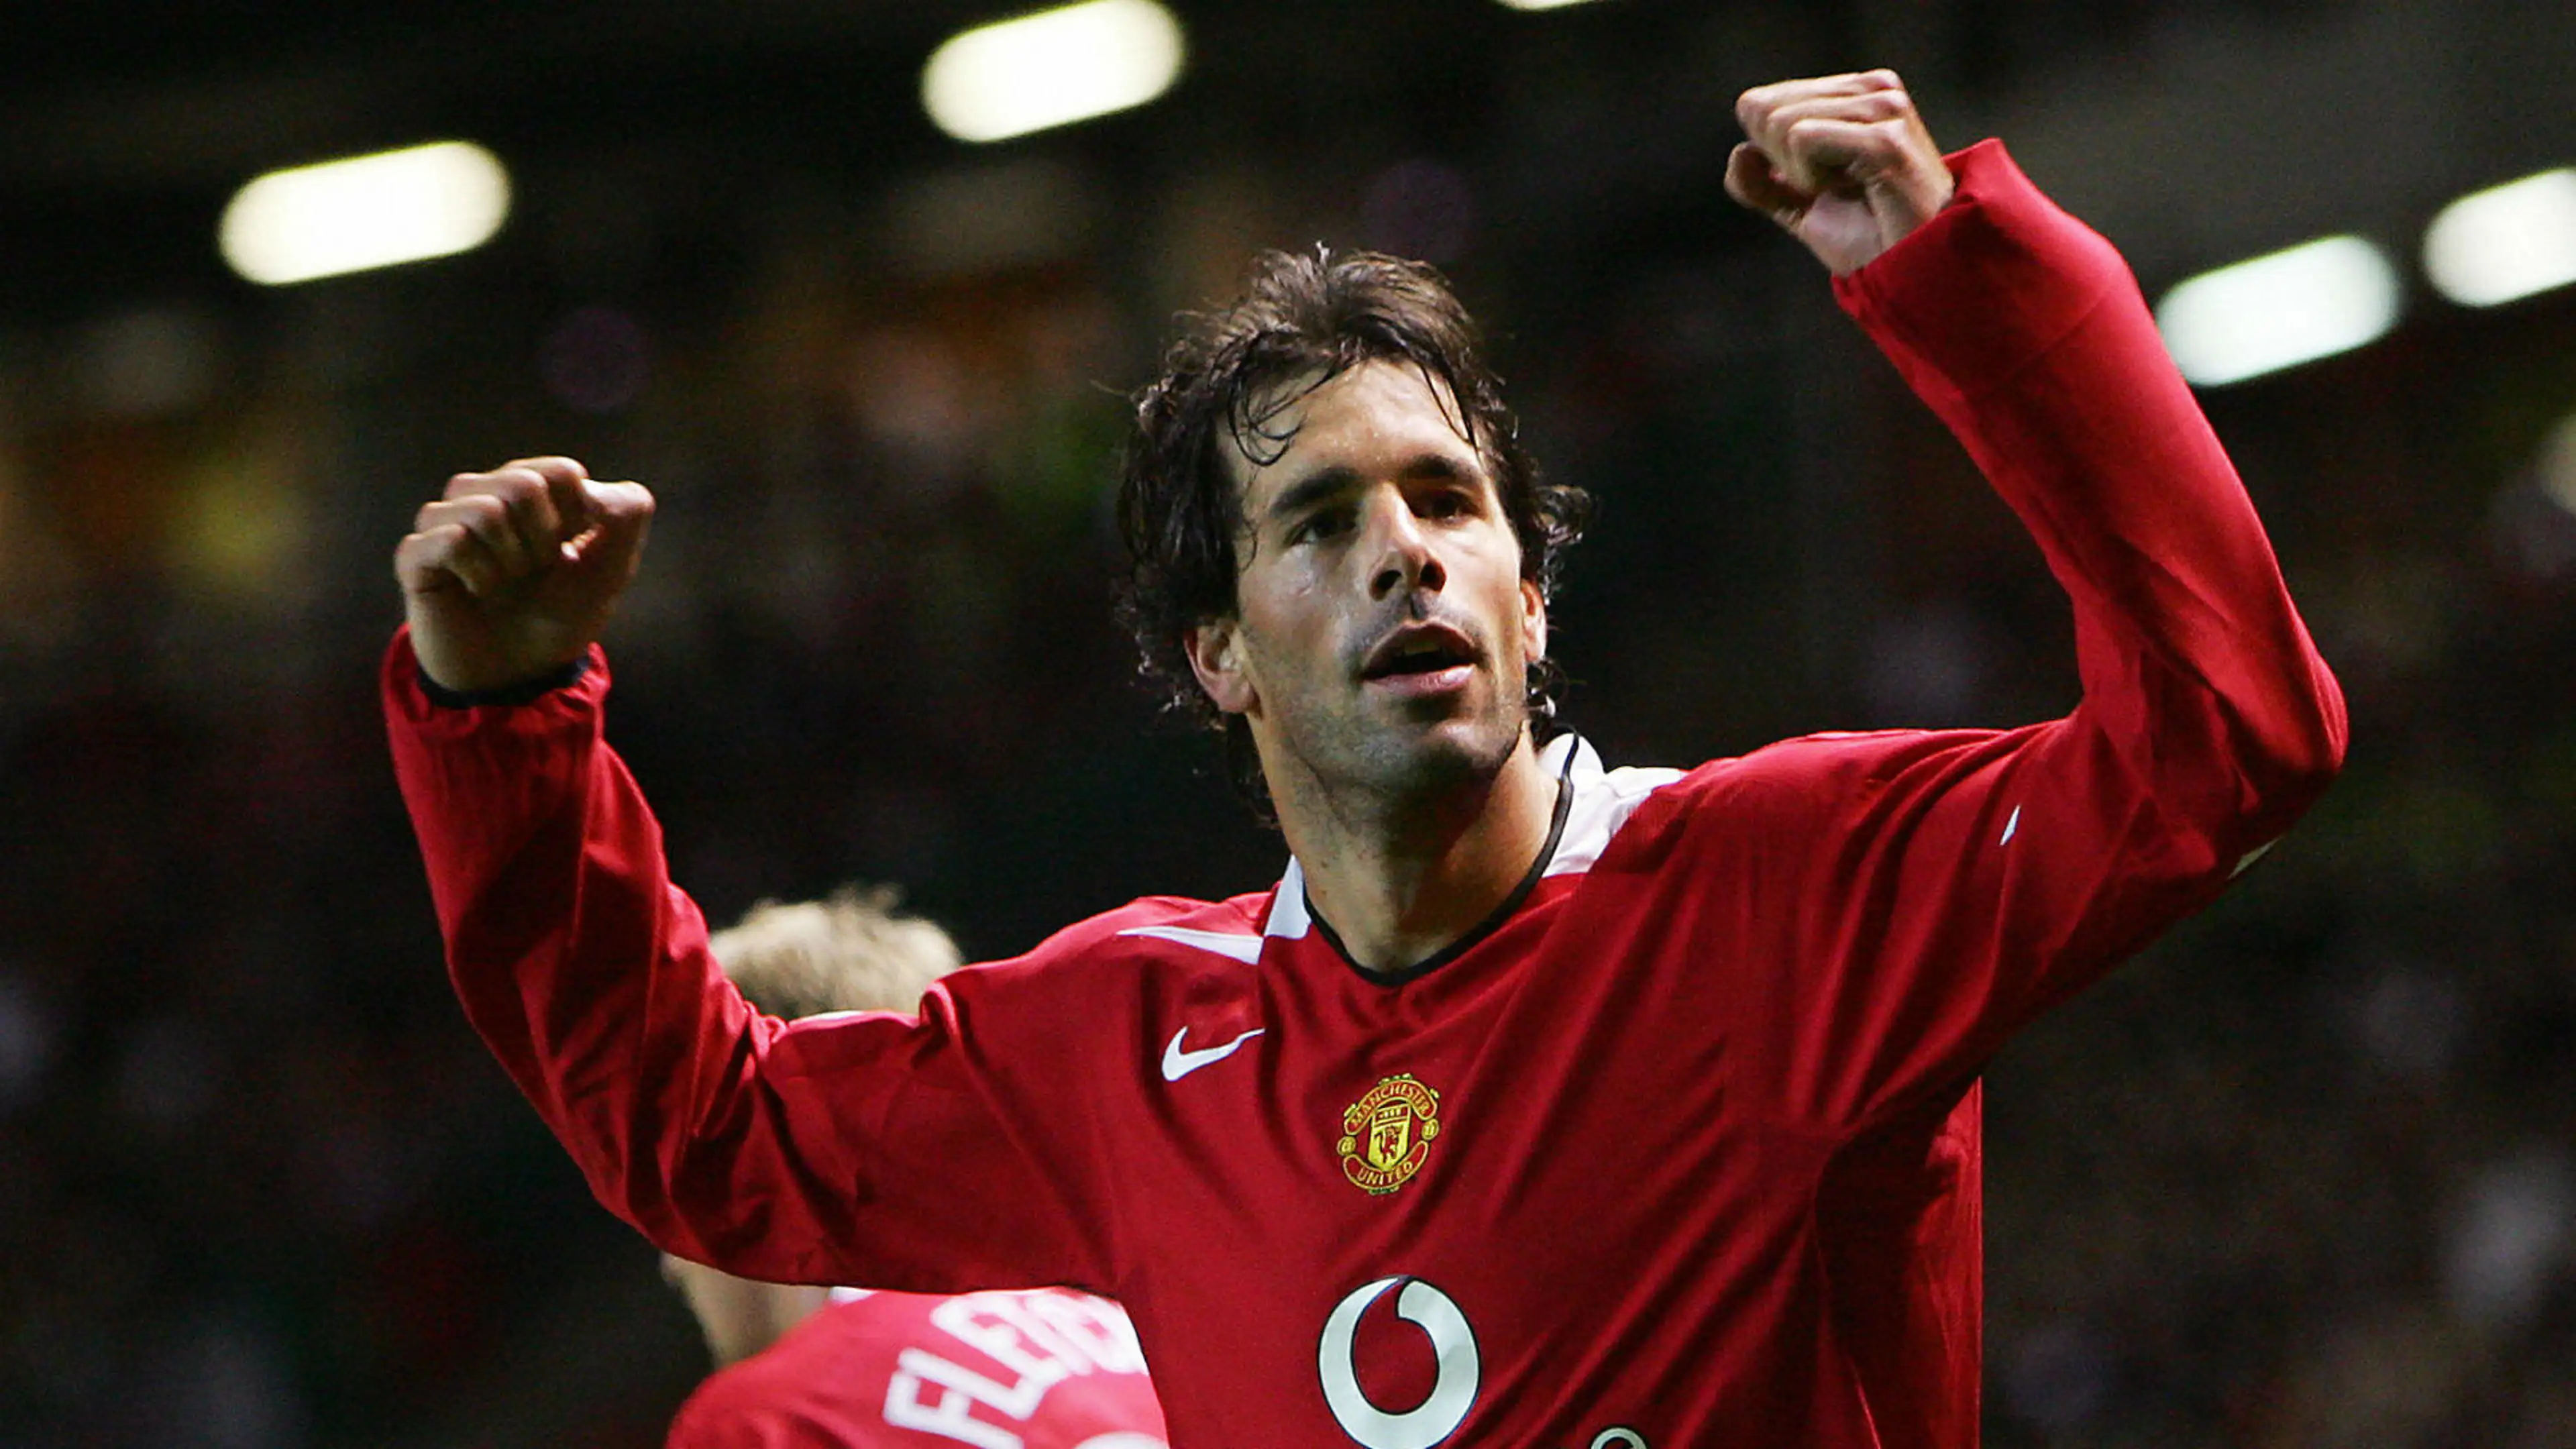 21 Surprising Facts About Ruud Van Nistelrooy - Facts.net